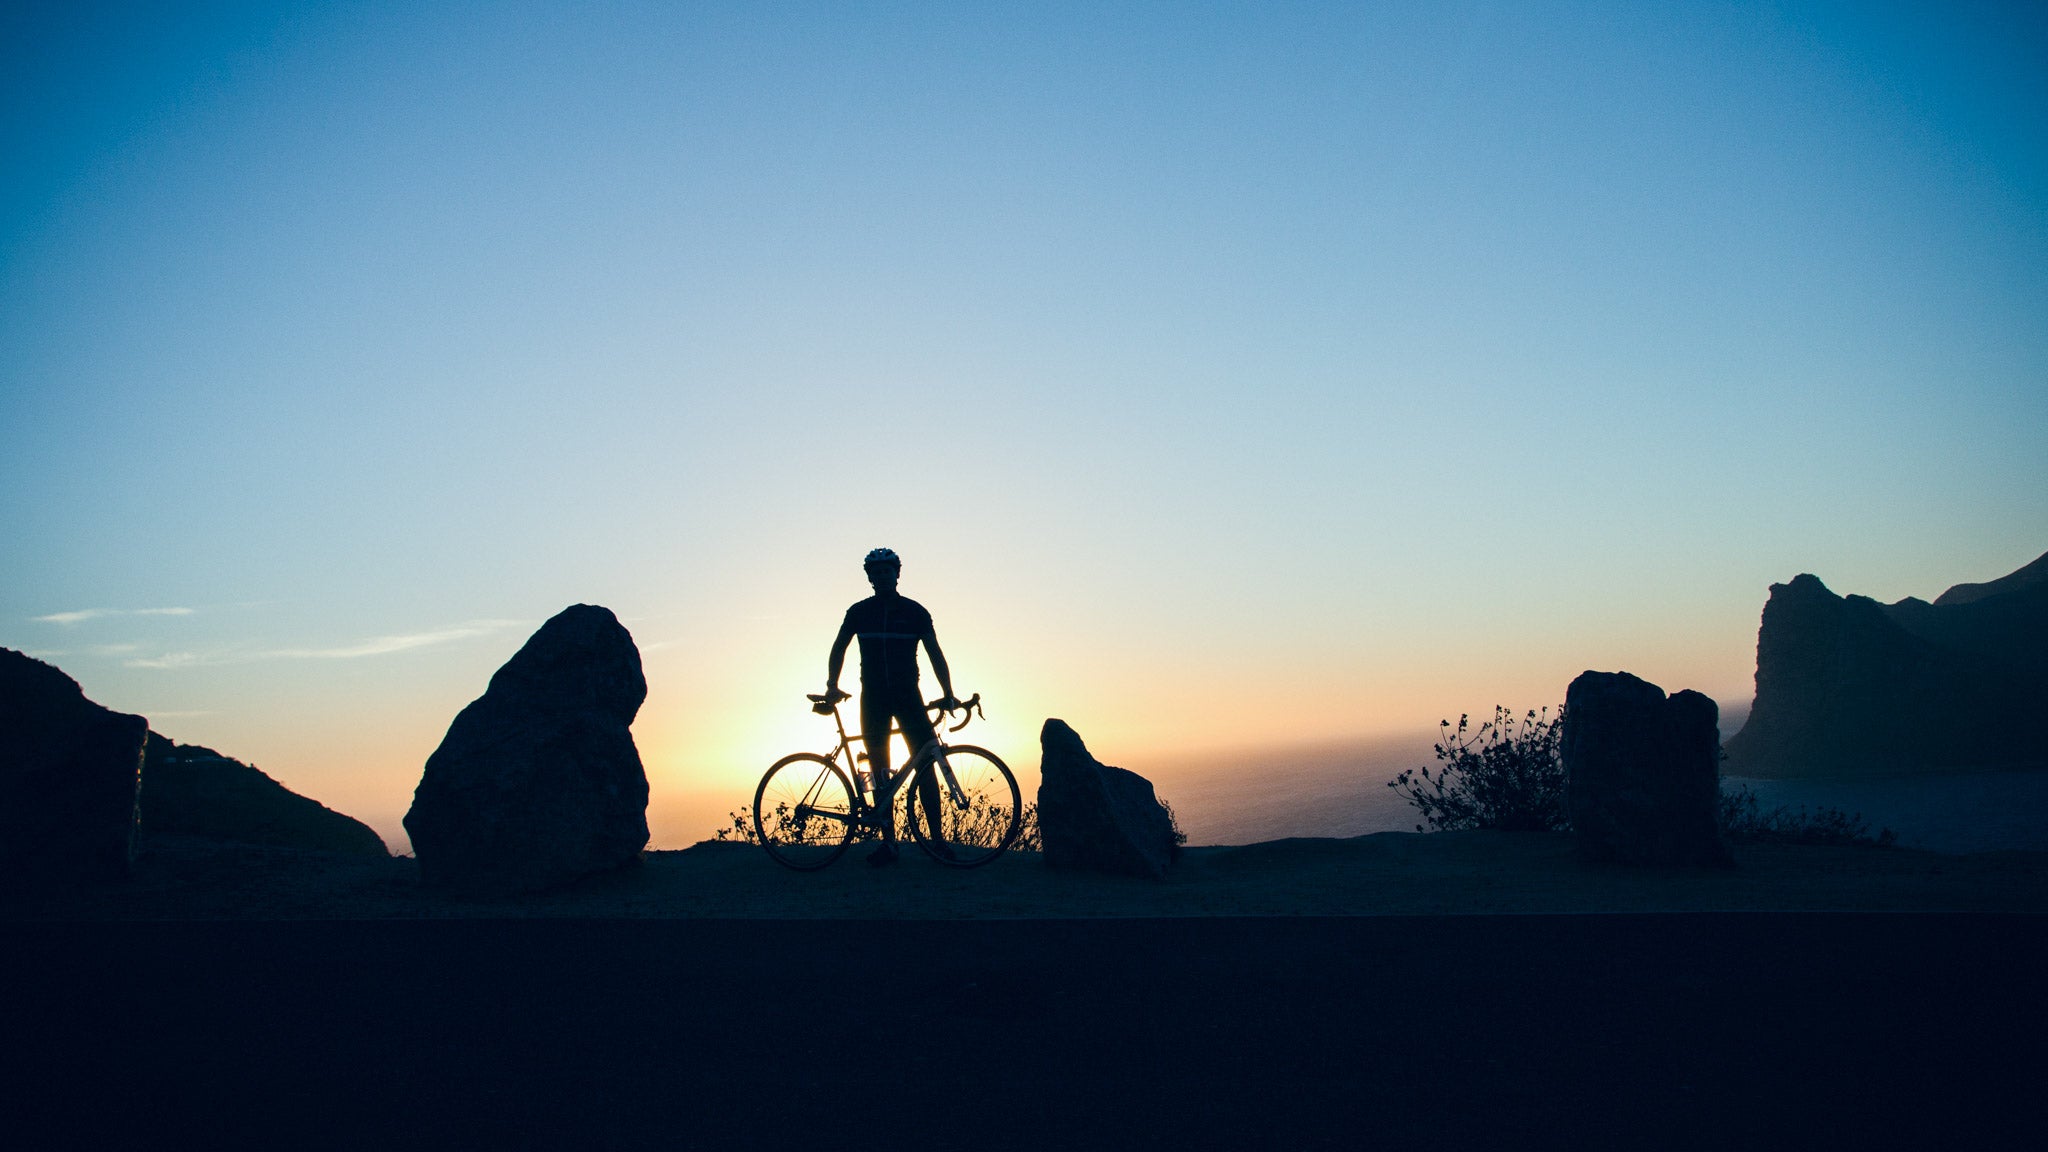 A silhouette of a man standing with a bike in front of a sun rise.